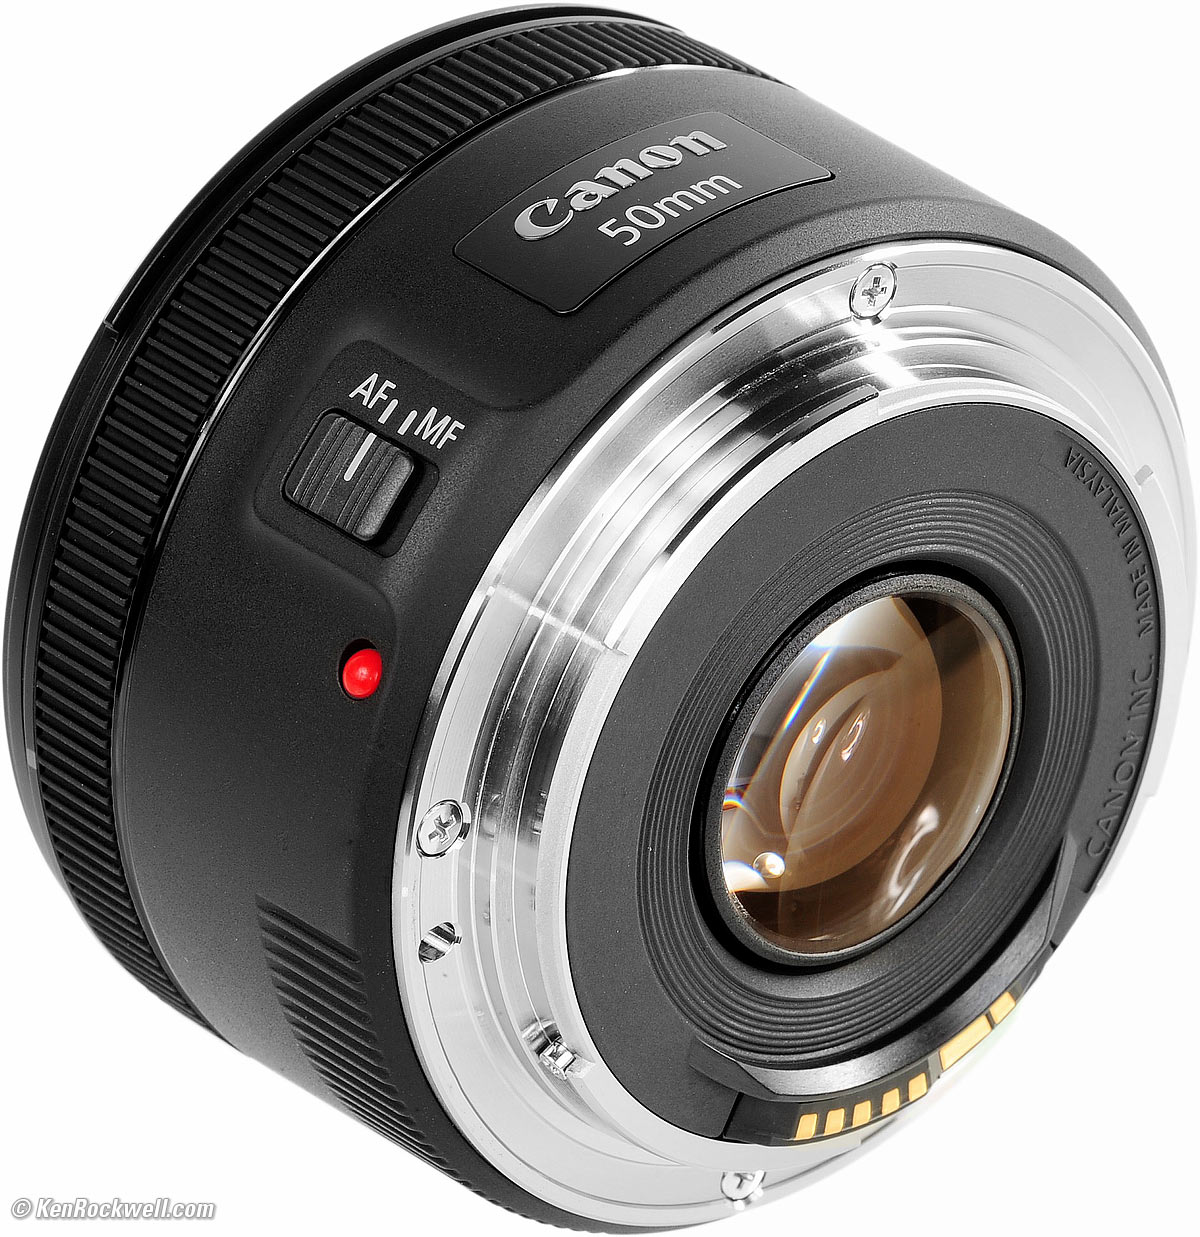 Canon 50mm f/1.8 STM Review